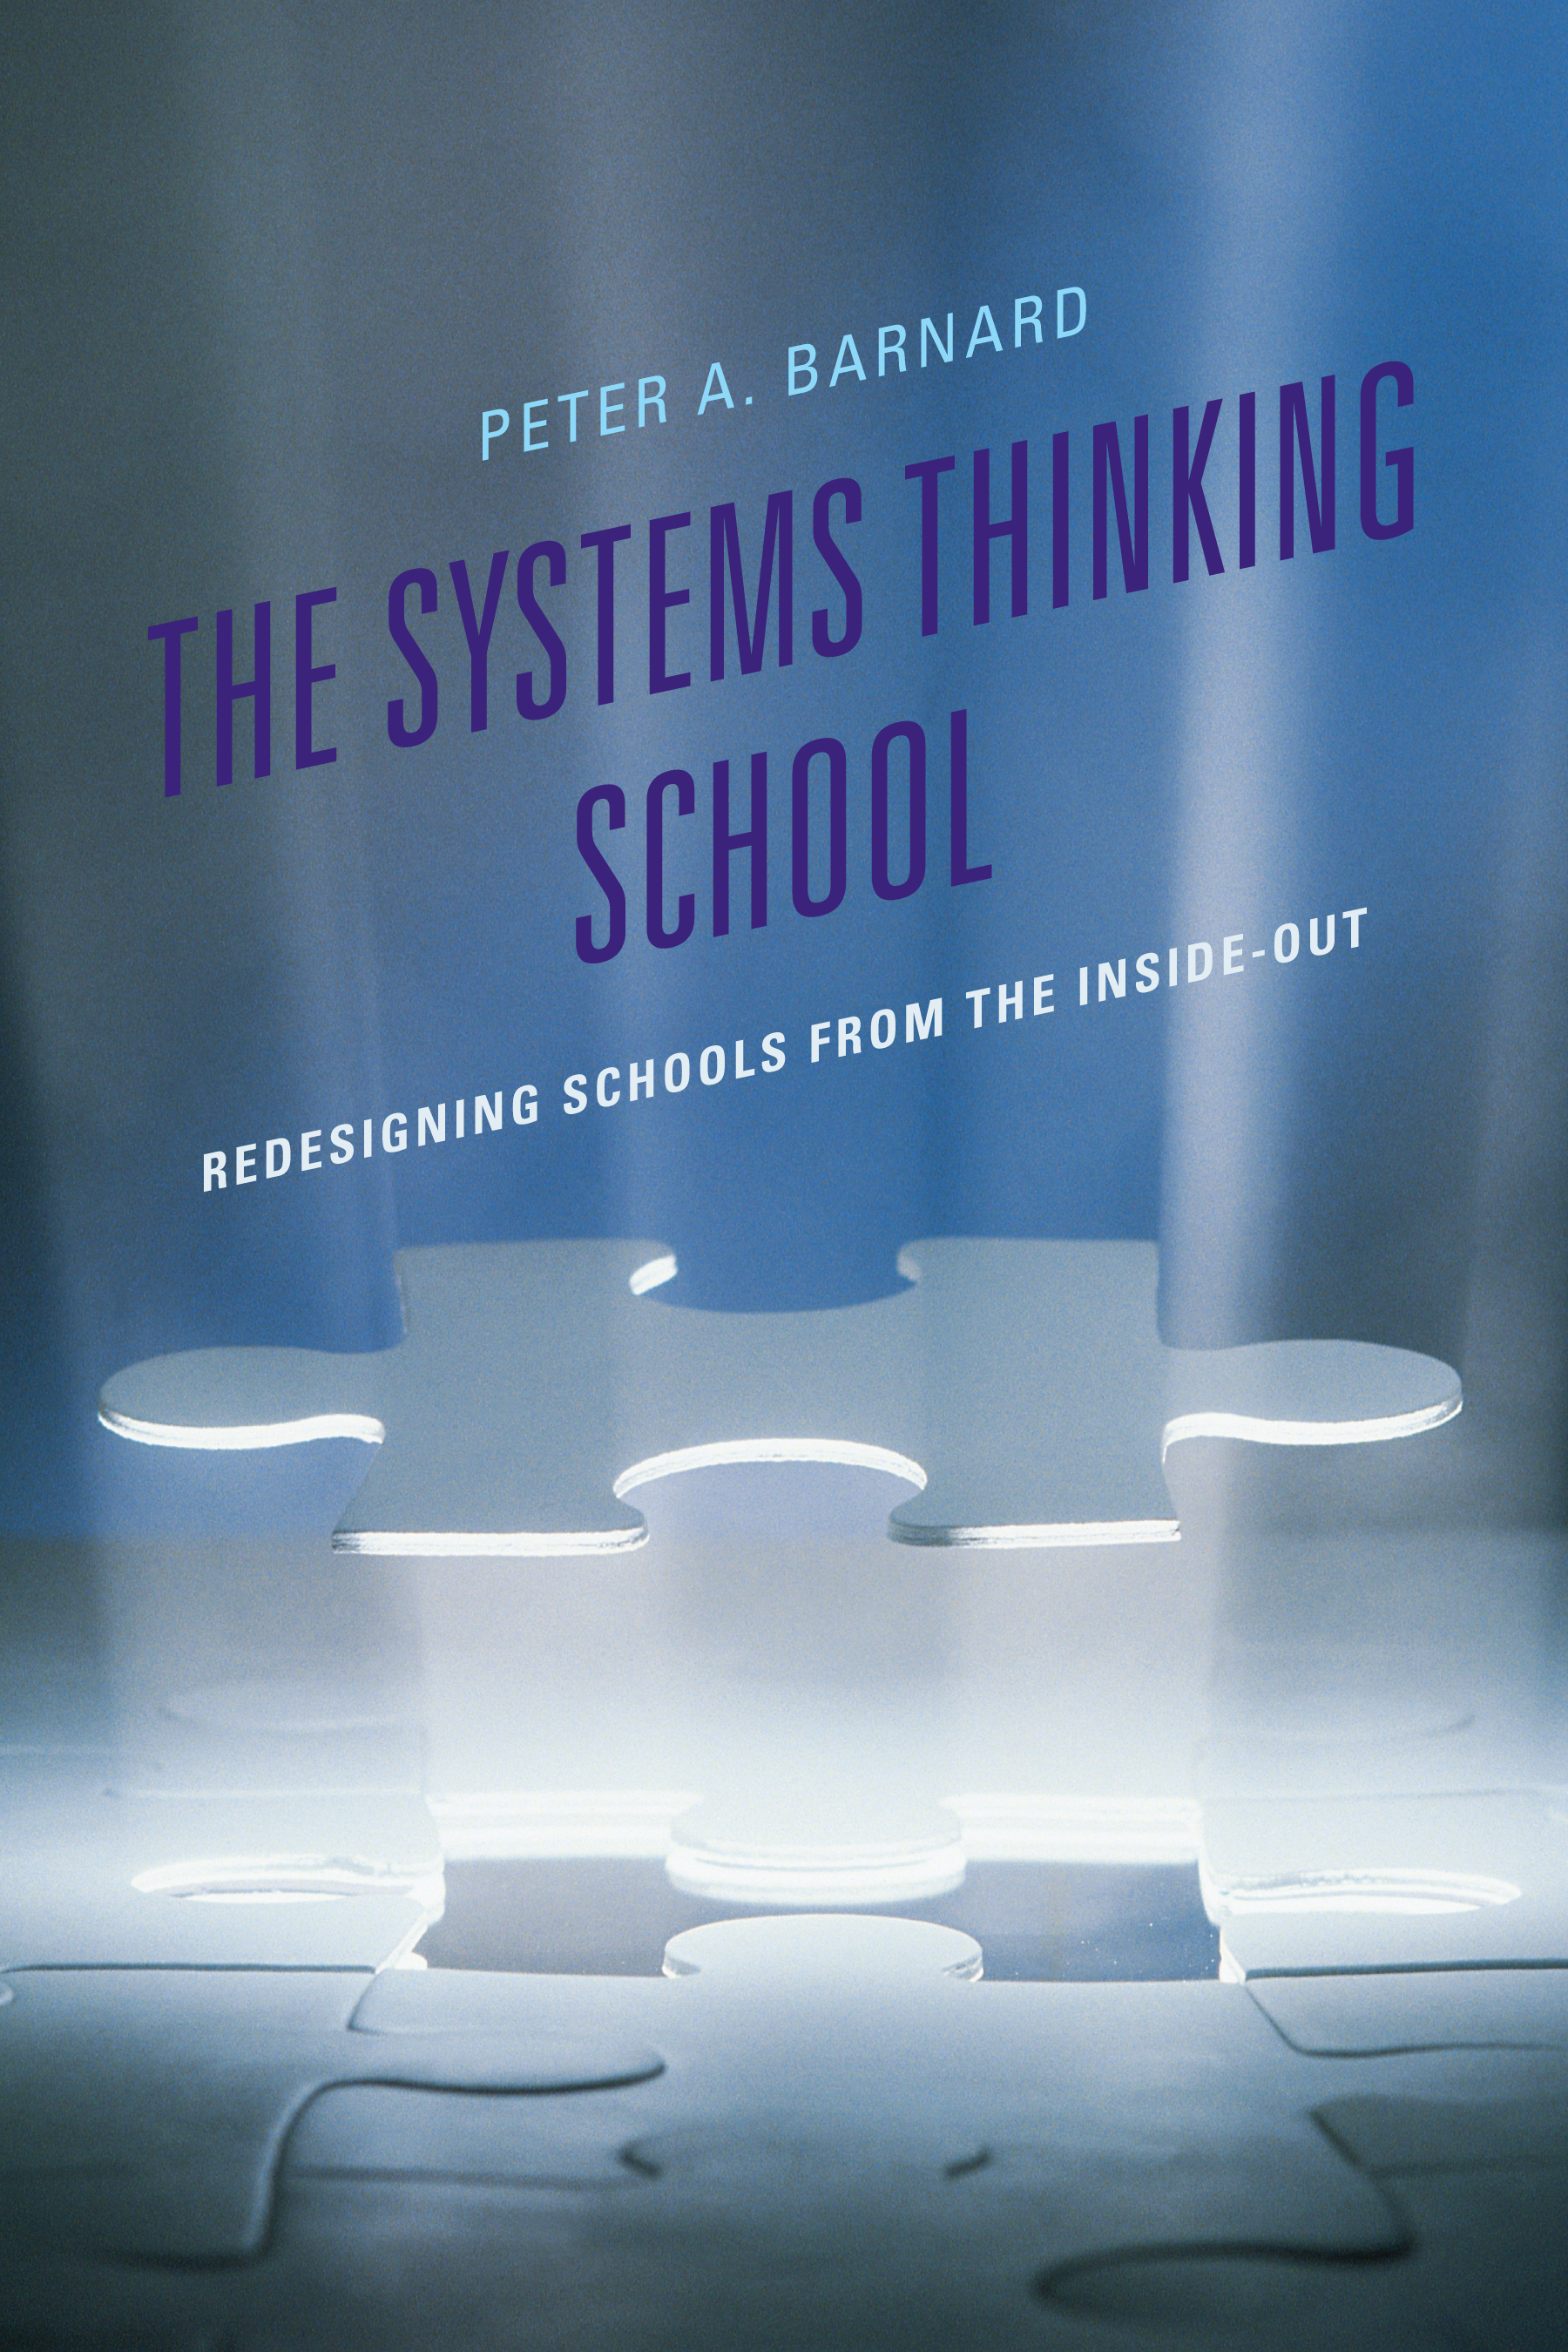 The Systems Thinking School: Redesigning Schools from the Inside-Out